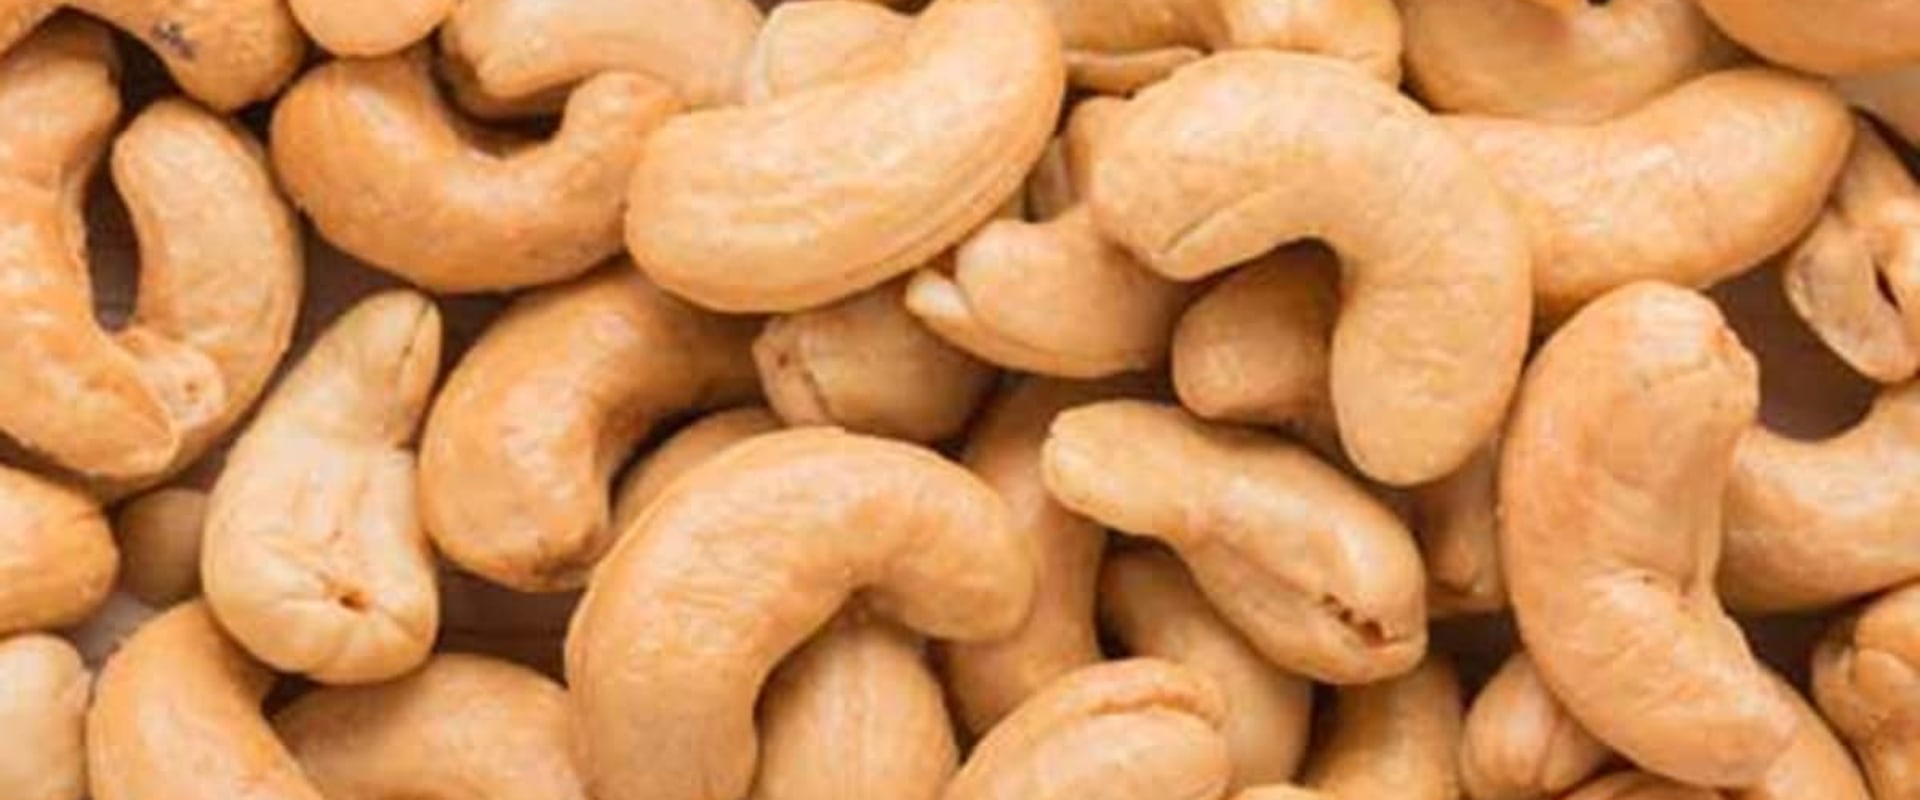 Can eating too many cashews hurt you?